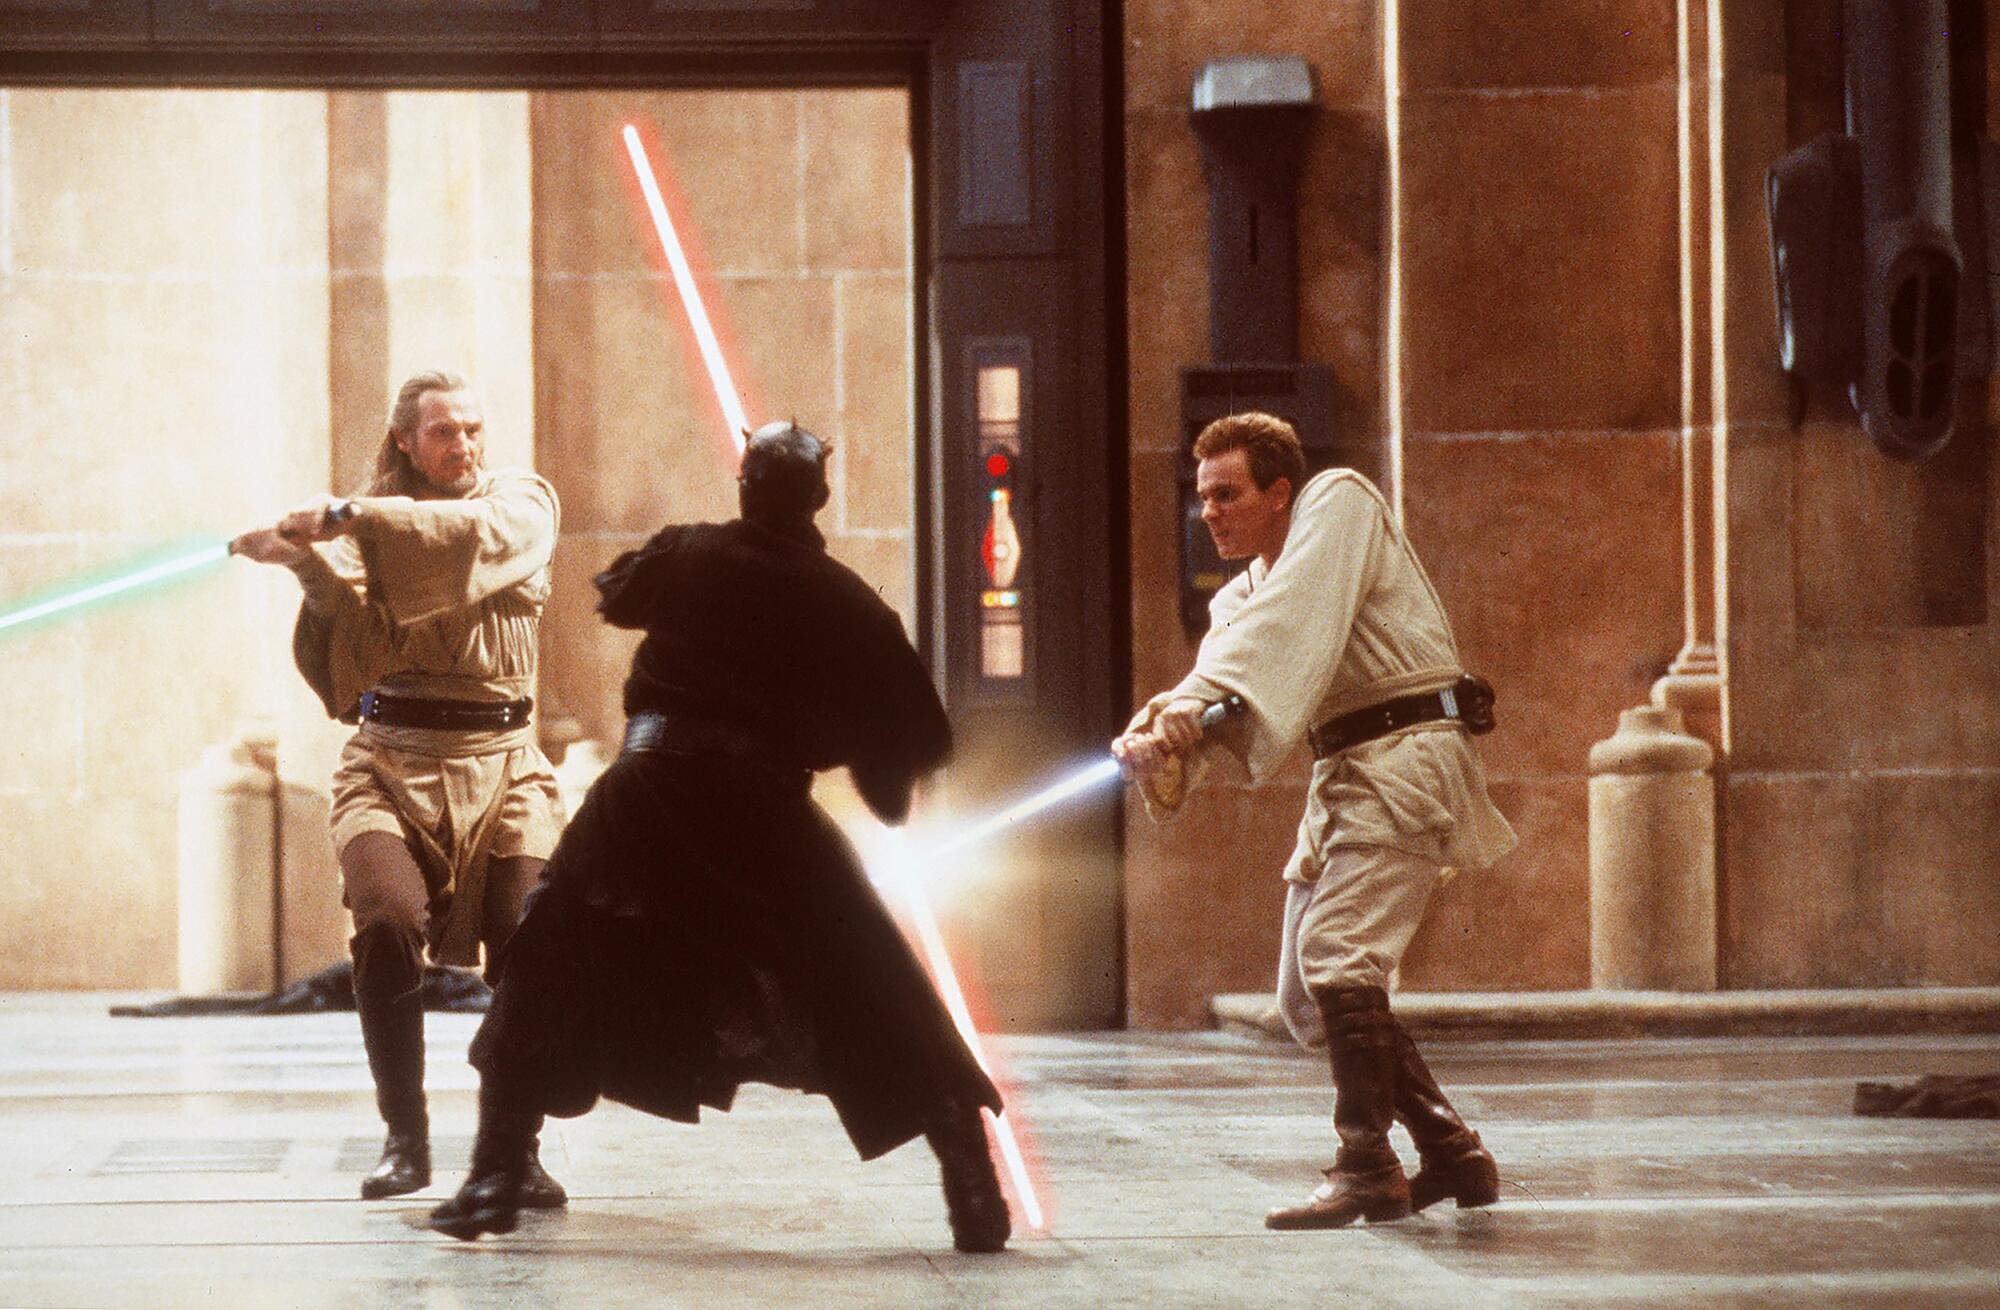 Three warriors face off in a lightsaber duel.